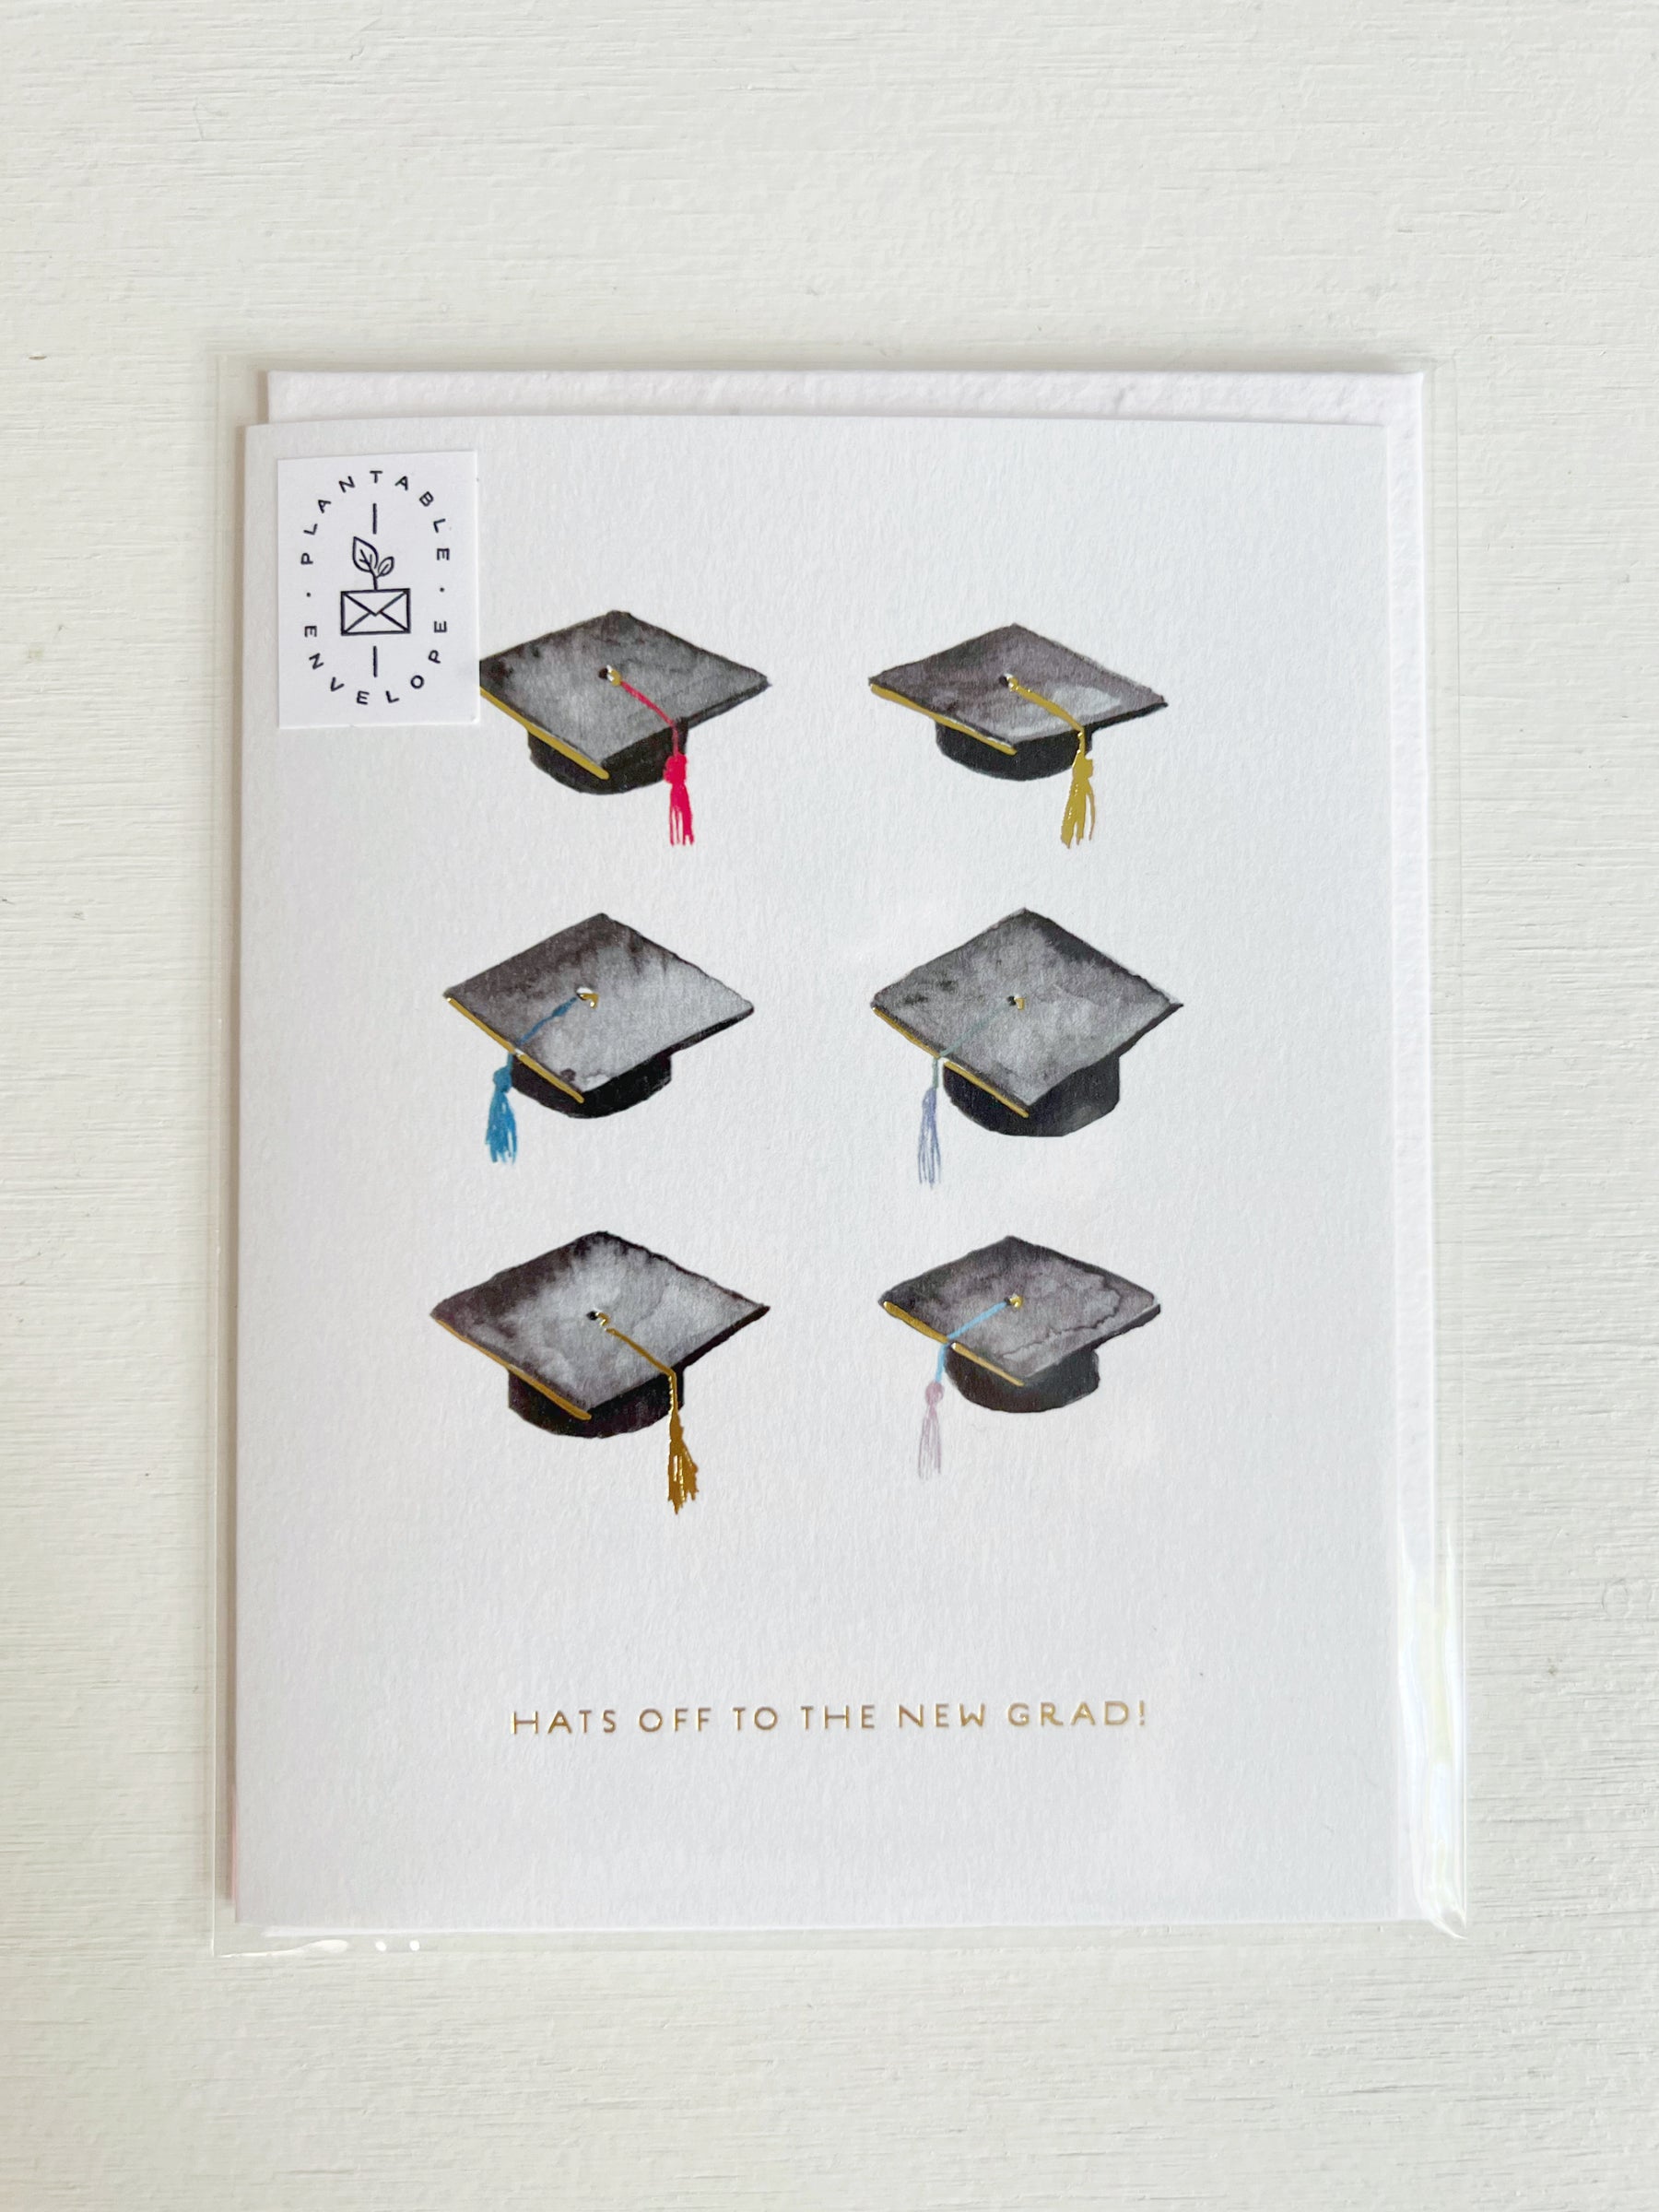 Hats Off Card